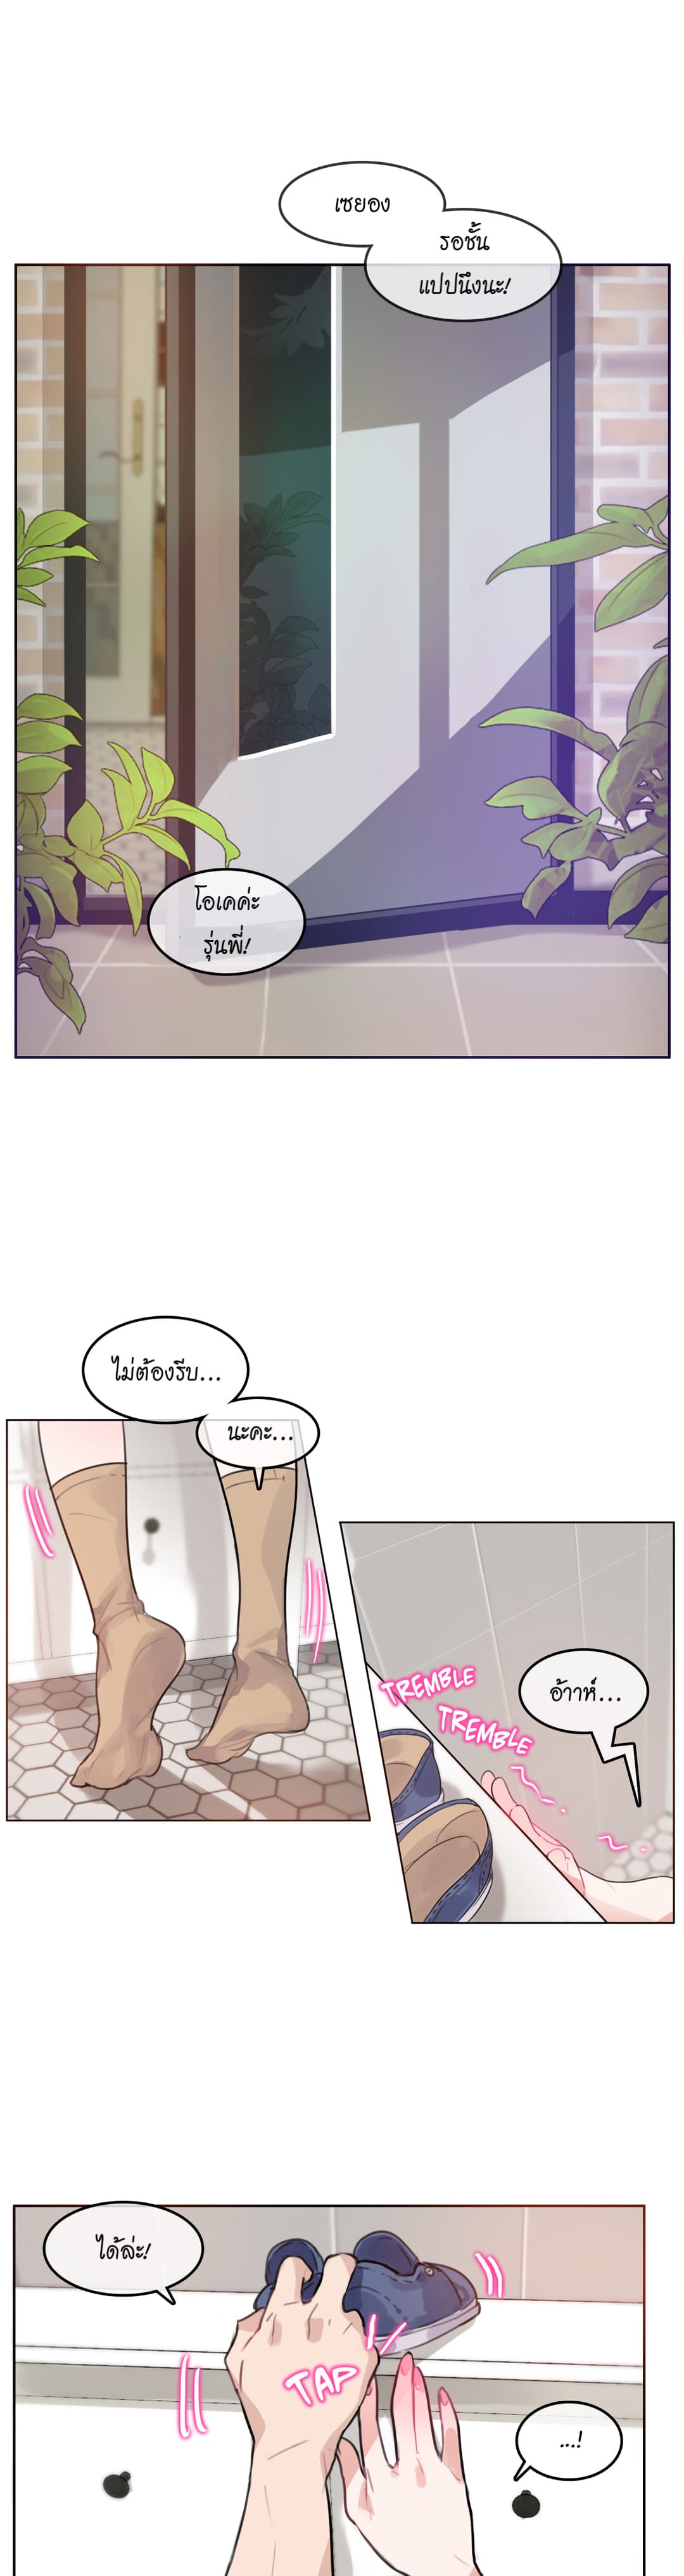 A Pervert’s Daily Life 16 (1)